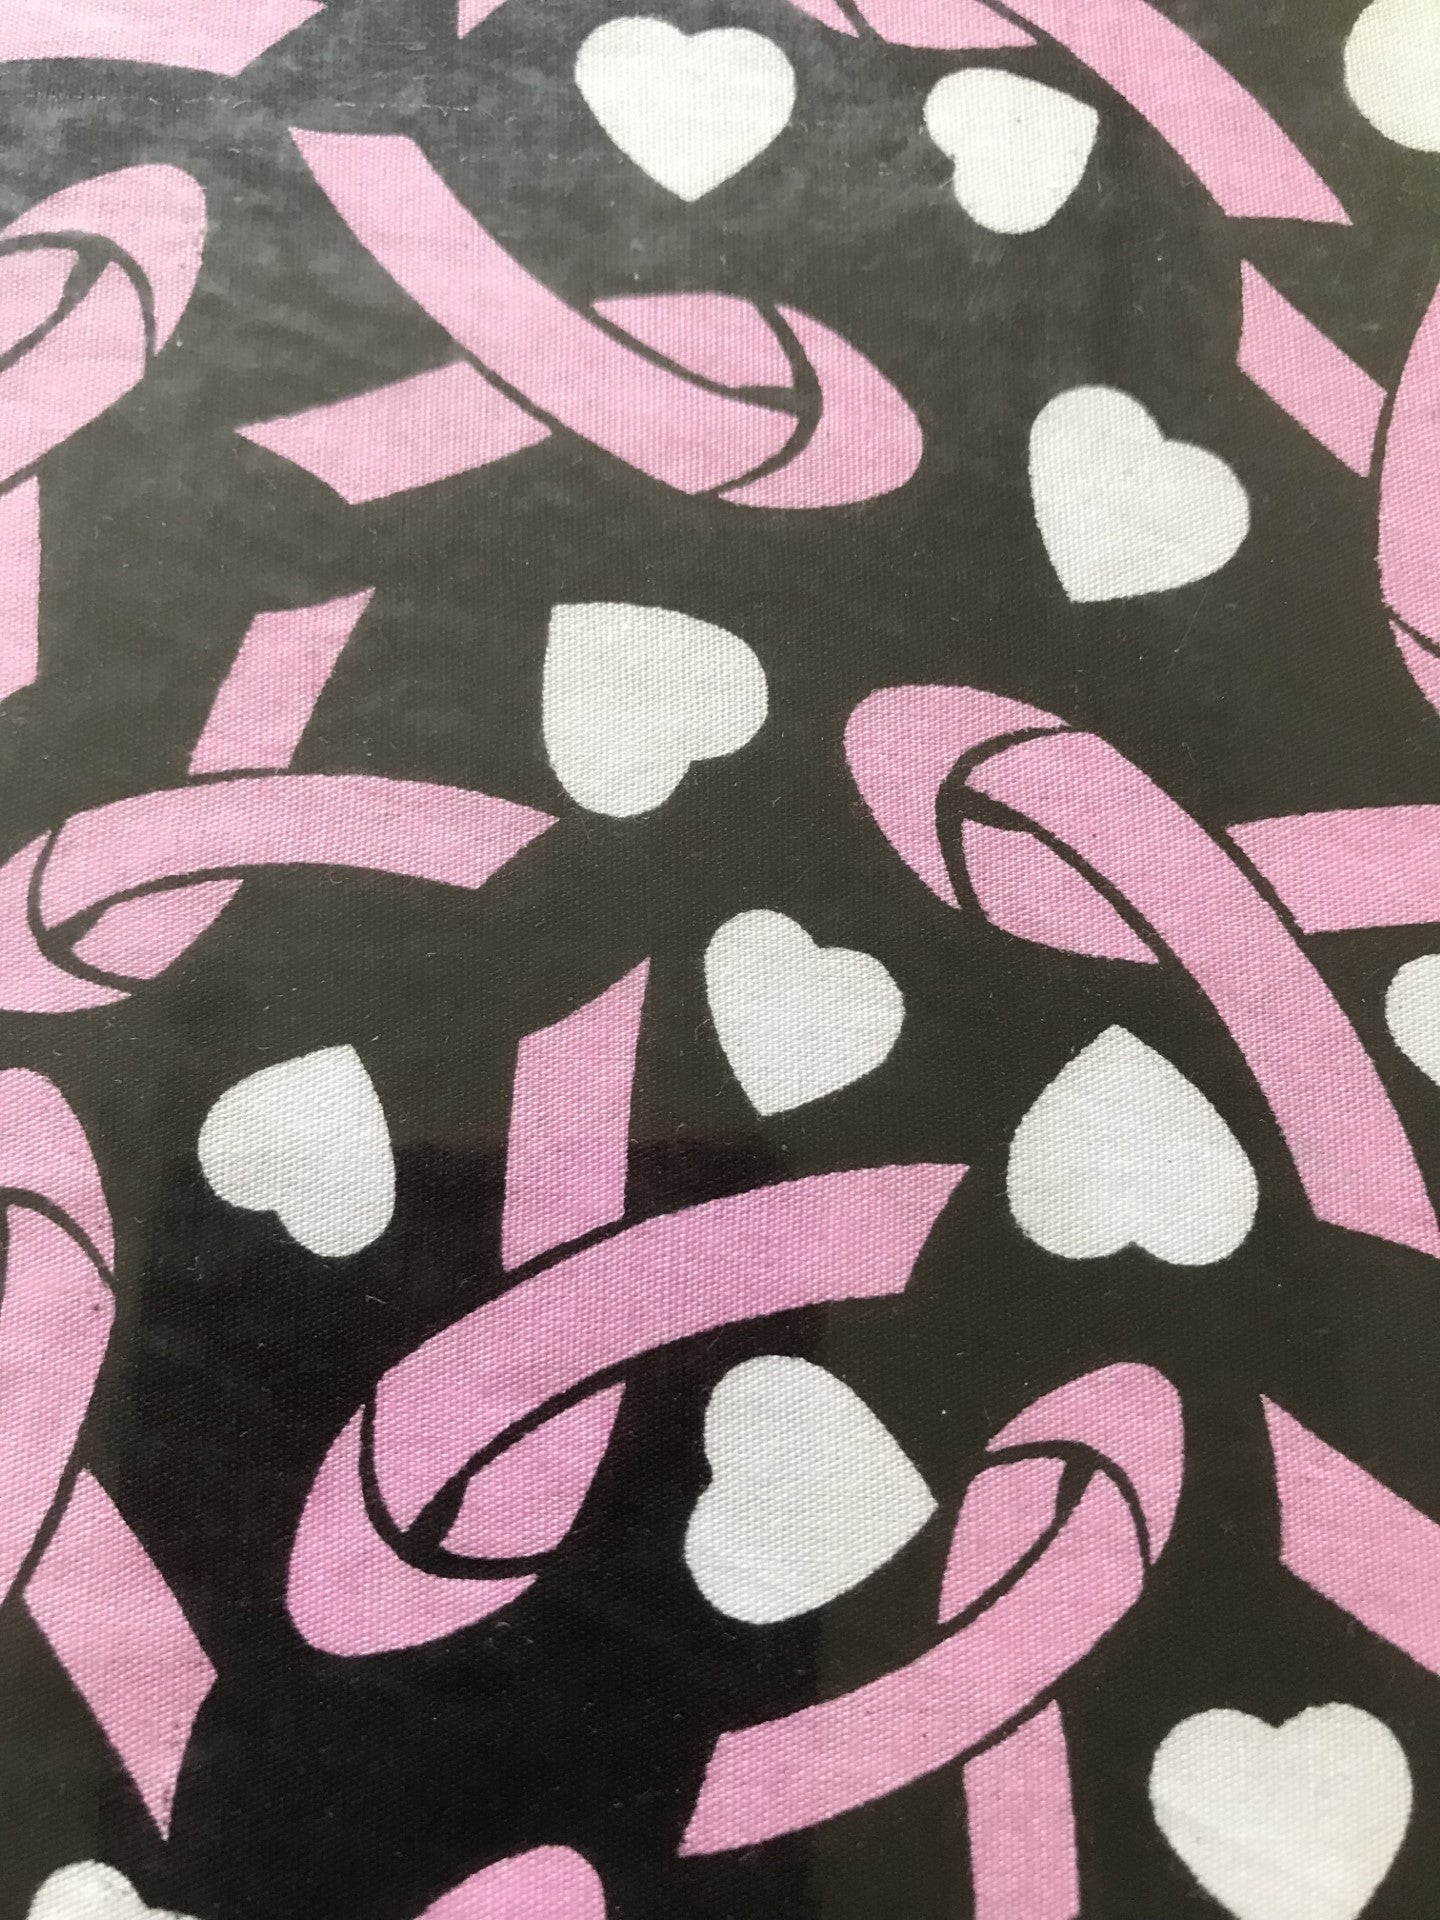 44 x 36 Cancer Awareness Hearts and Ribbons on Black Fabric 100% Cotton